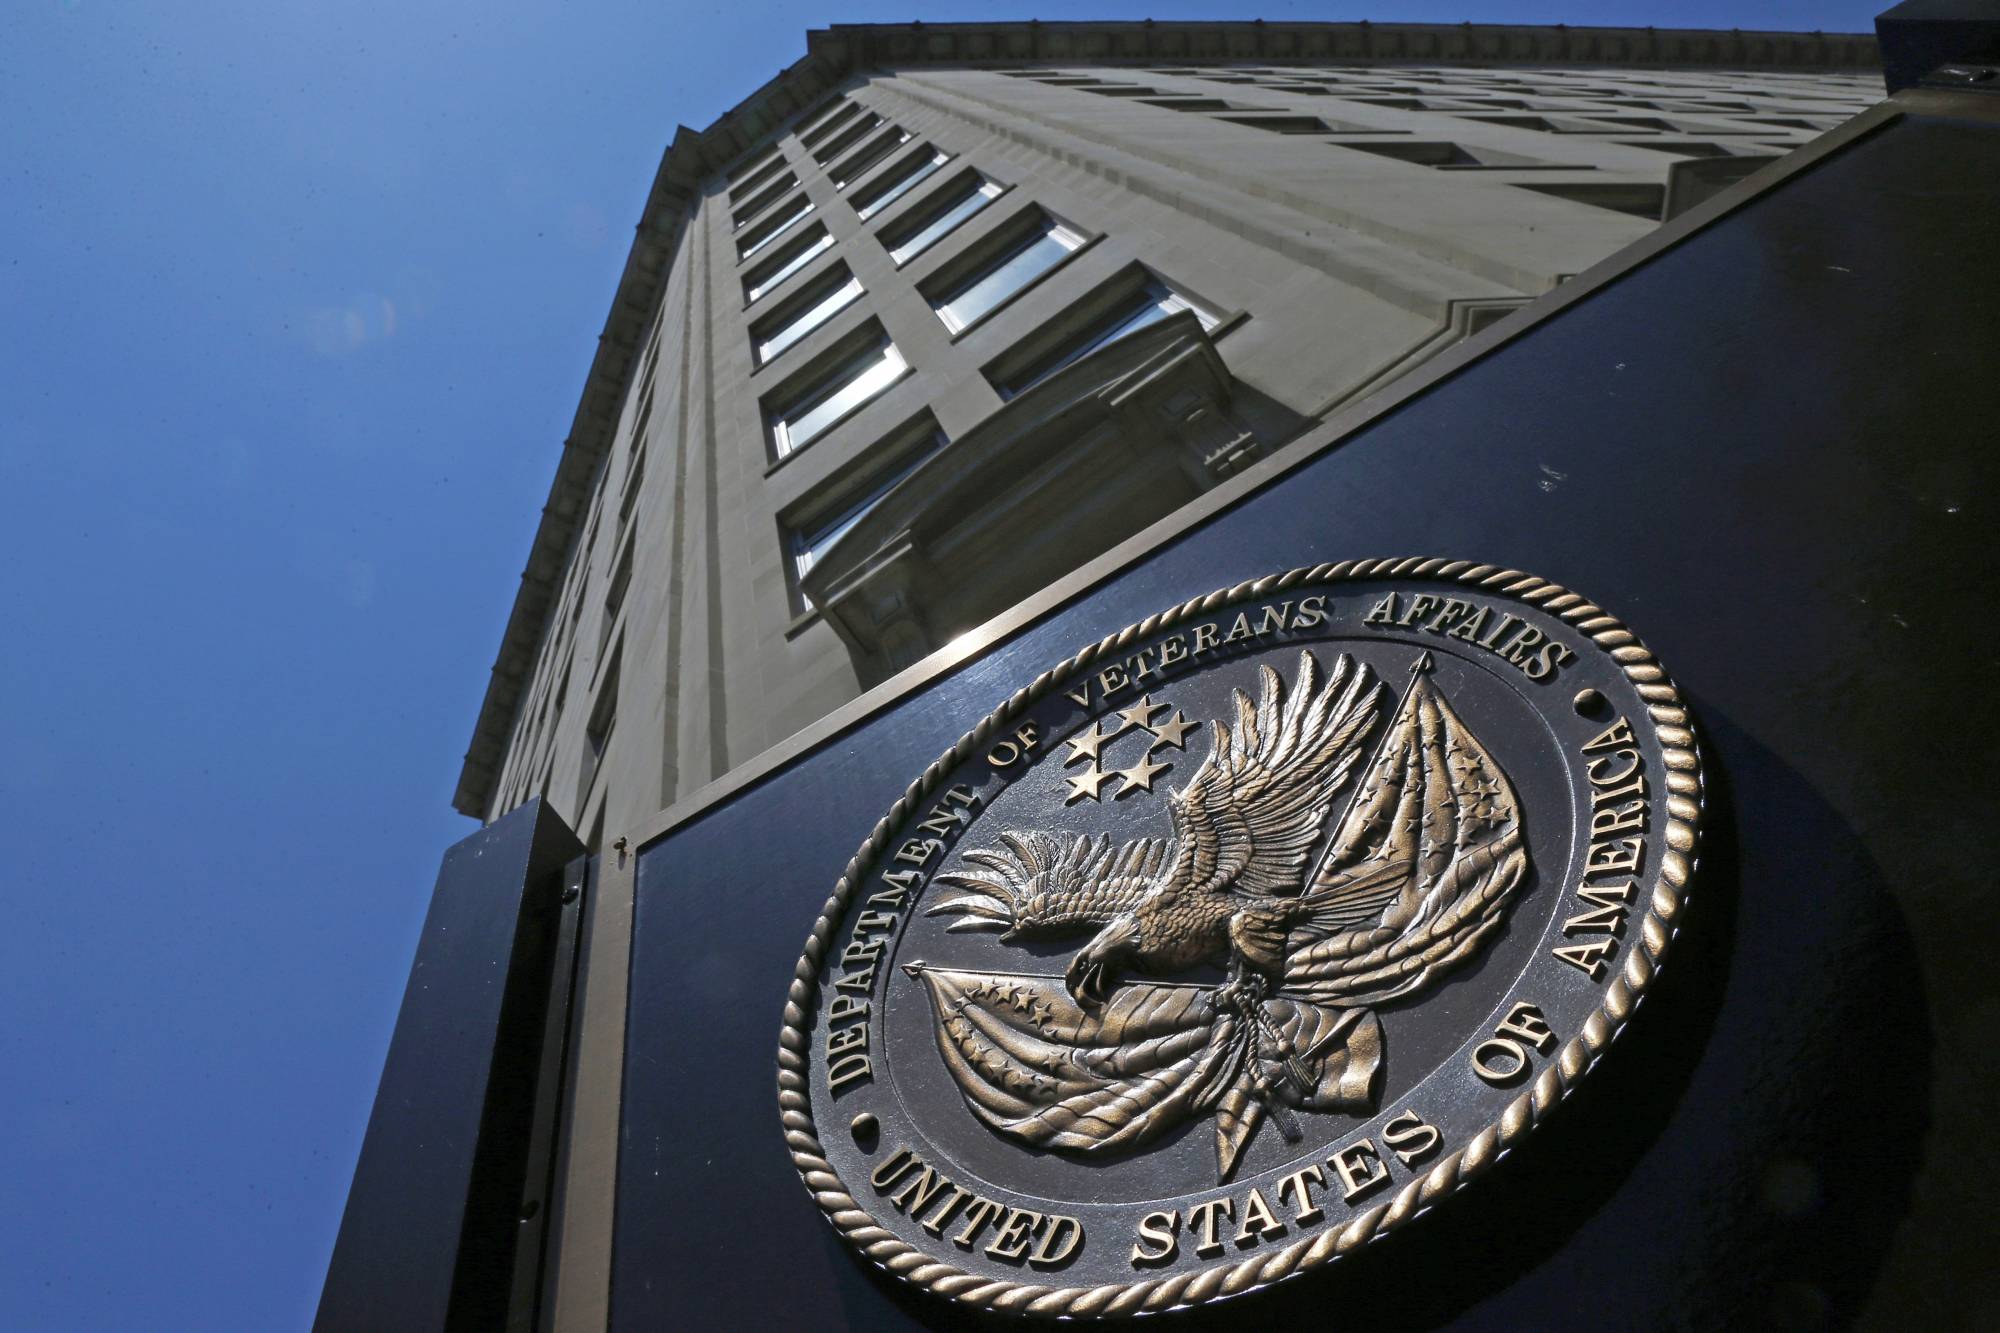 FILE - In this June 21, 2013, file photo, the seal a fixed to the front of the Department of Veterans Affairs building in Washington. The Republican-led House on March 16, 2017, has approved legislation to make it easier for the Department of Veterans Affairs to fire, suspend or demote employees for poor performance or bad conduct, part of a renewed effort targeting VA accountability in the new Trump administration. (AP Photo/Charles Dharapak, File)